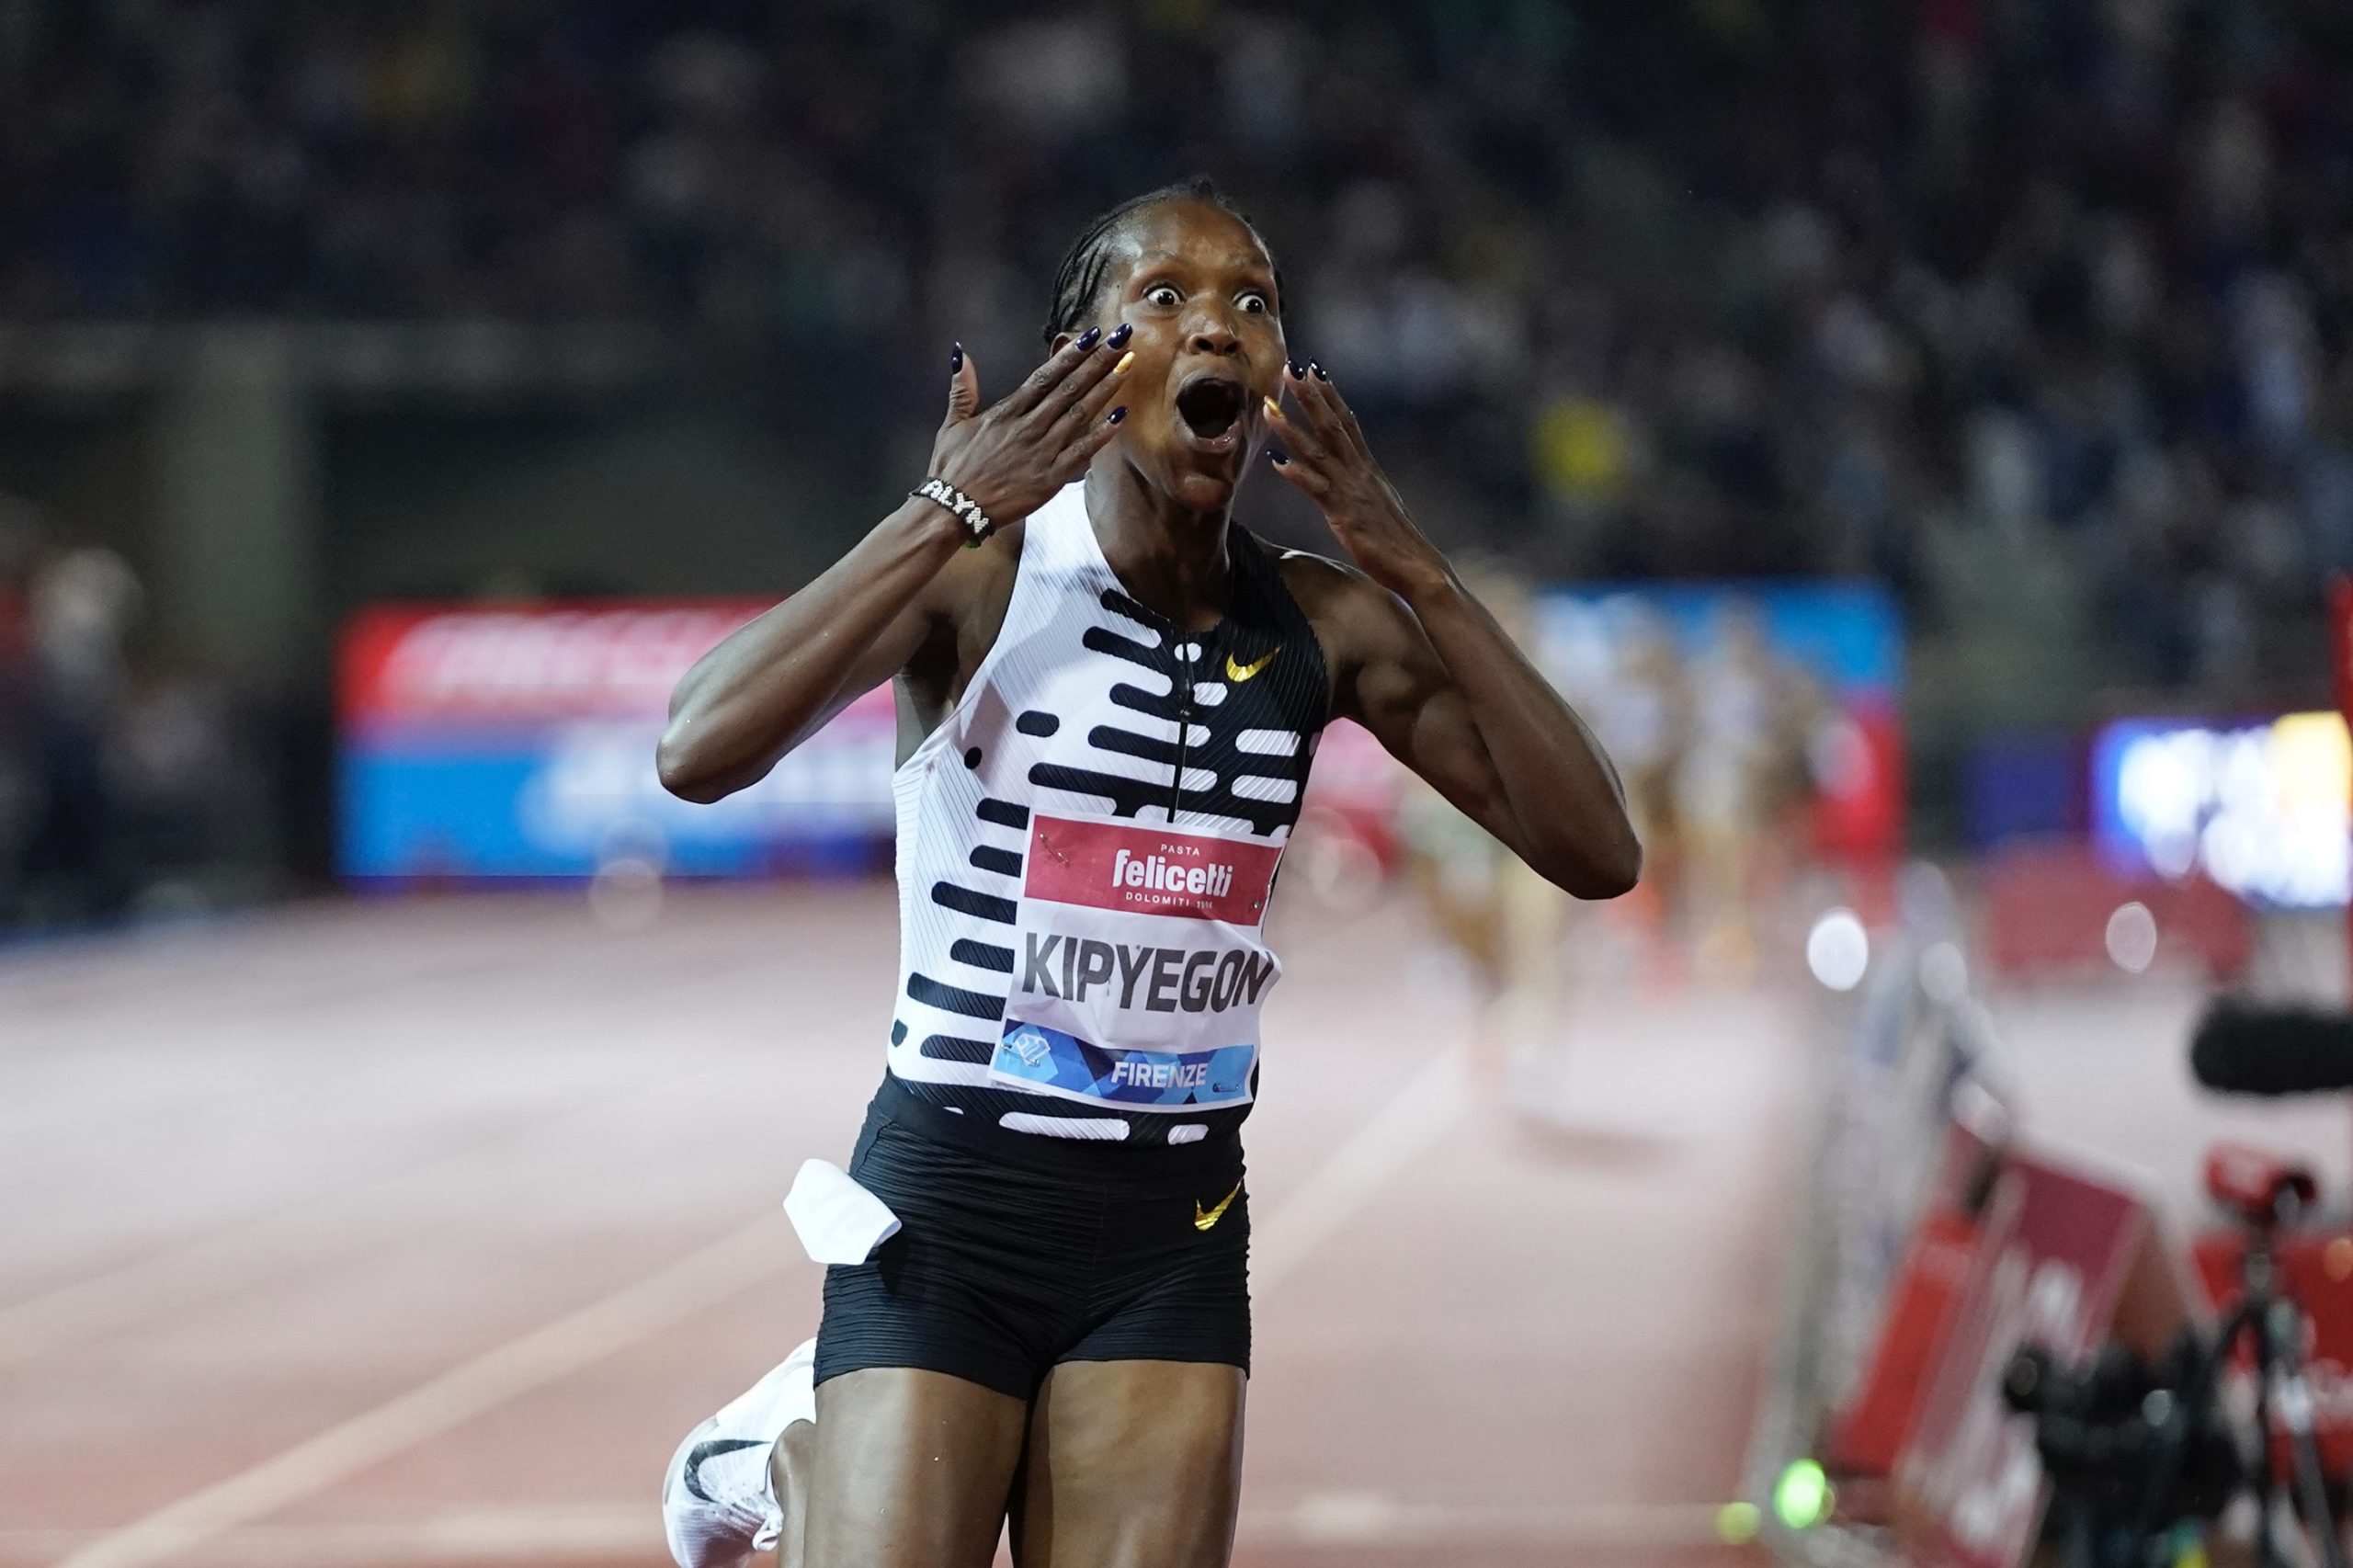 Faith Kipyegon Becomes First Woman to Break 3:50 Barrier in Women's 1500m